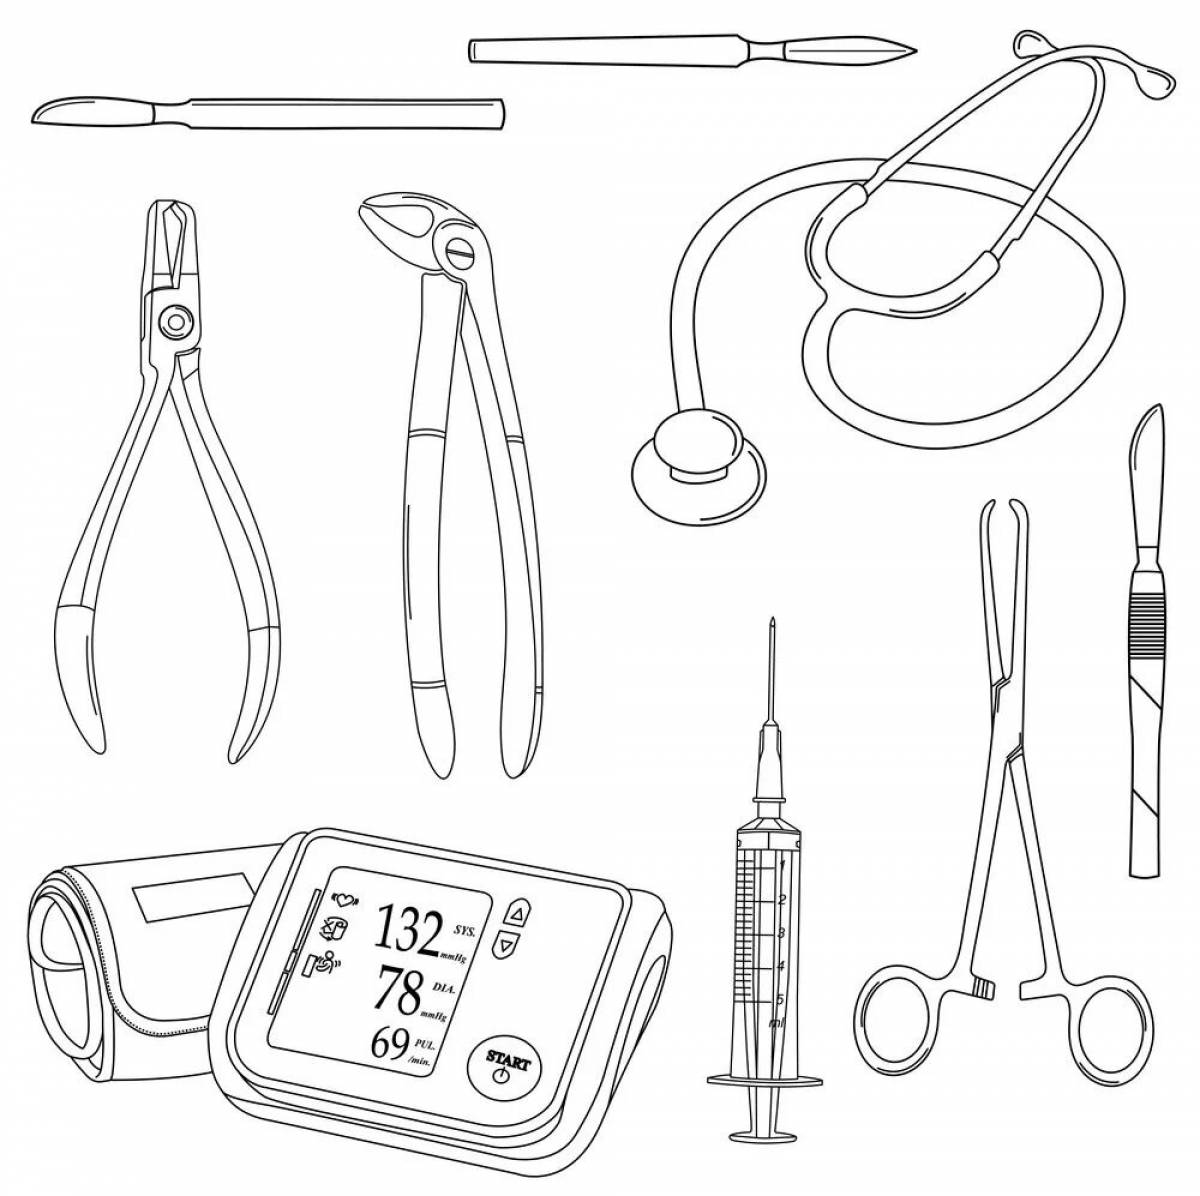 Fancy medical instruments coloring book